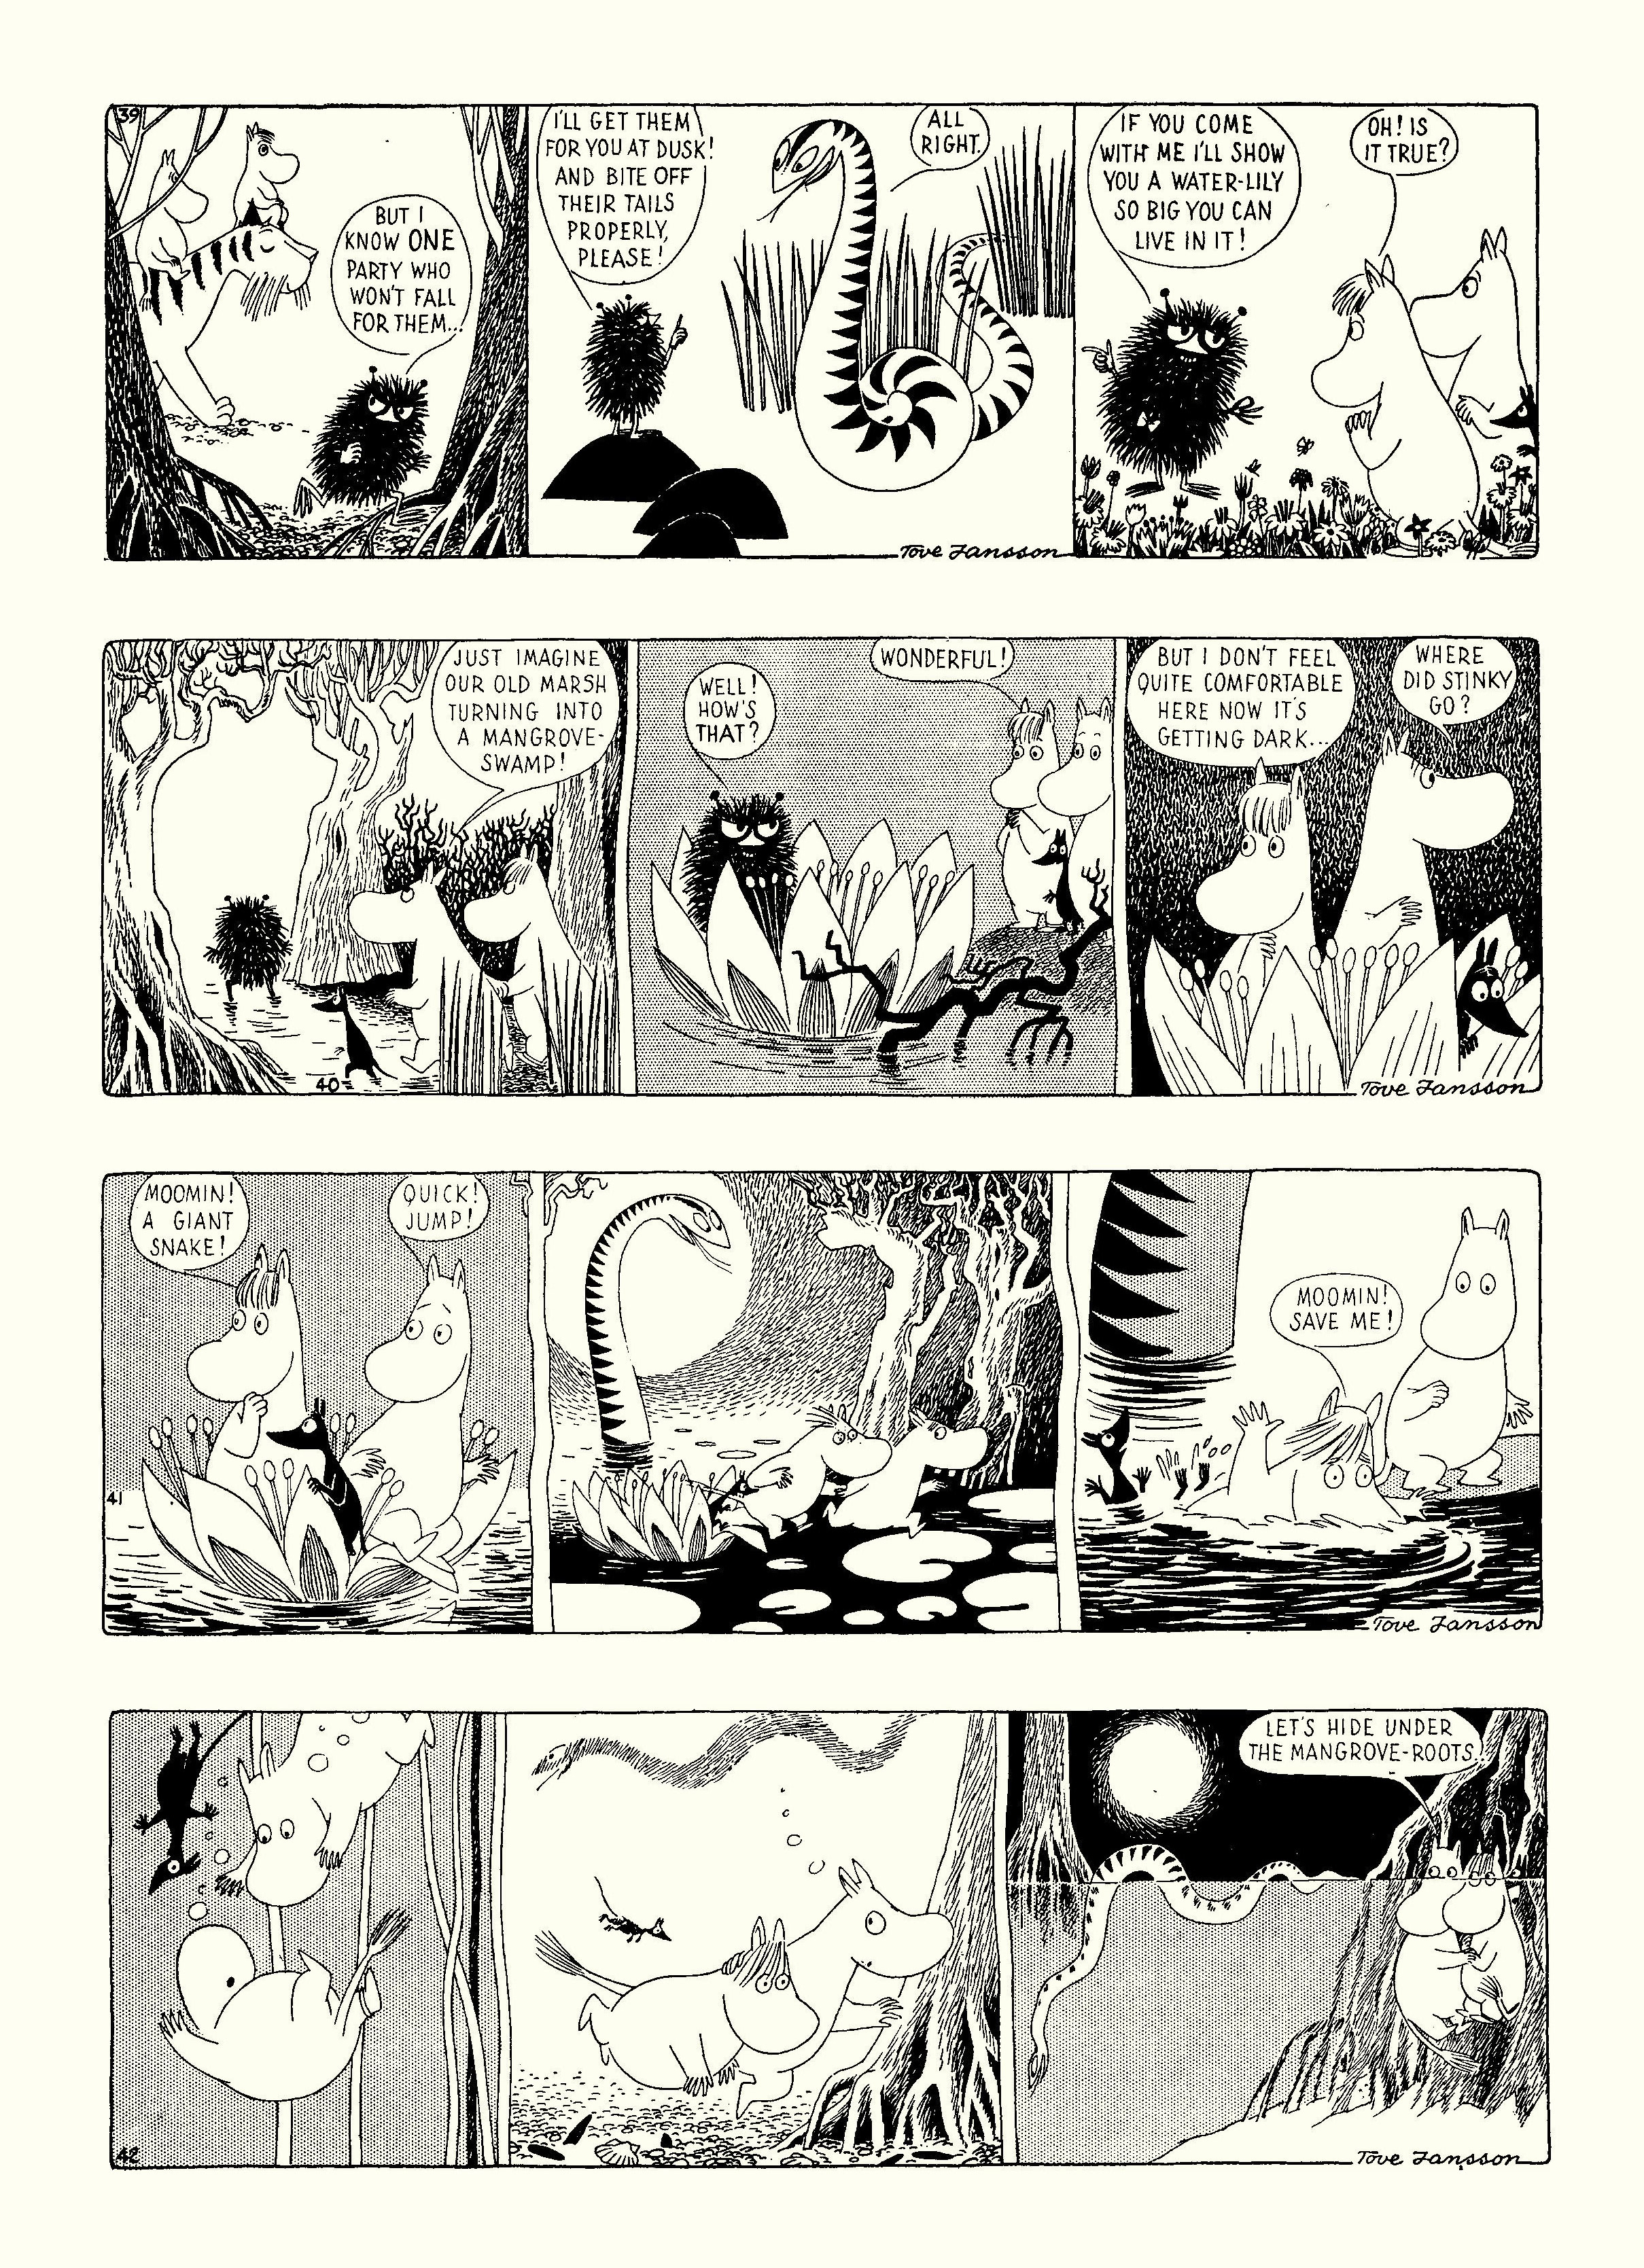 Read online Moomin: The Complete Tove Jansson Comic Strip comic -  Issue # TPB 3 - 30